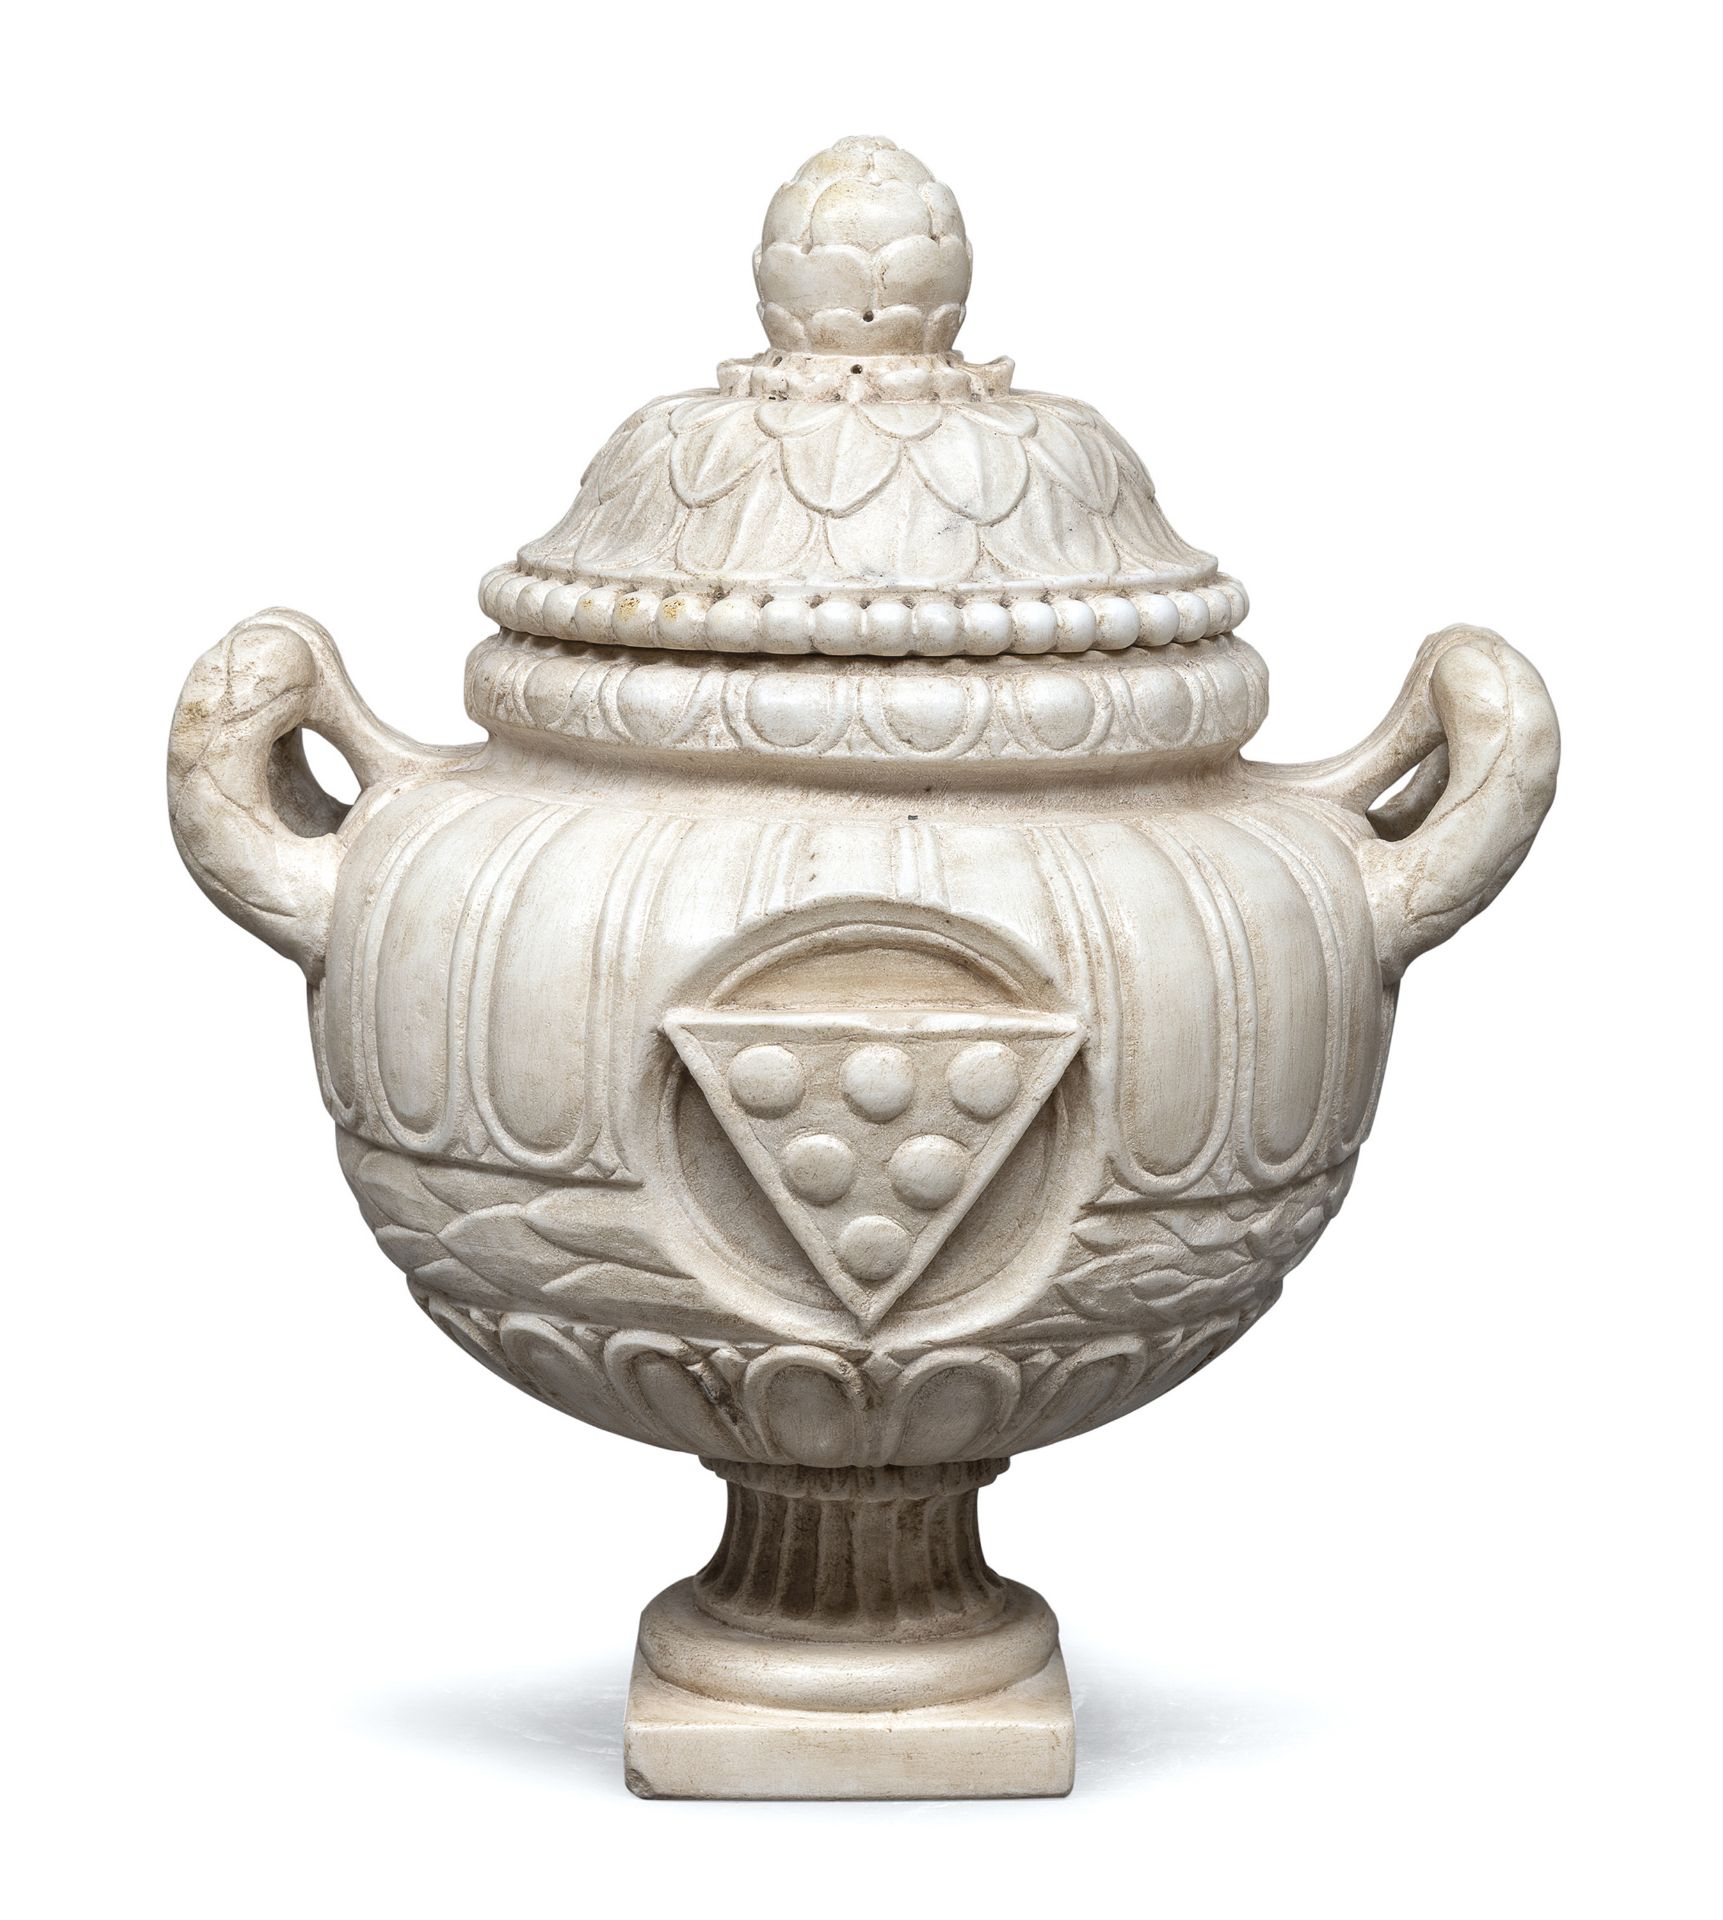 MEDICI VASE IN WHITE MARBLE FLORENCE 16TH CENTURY